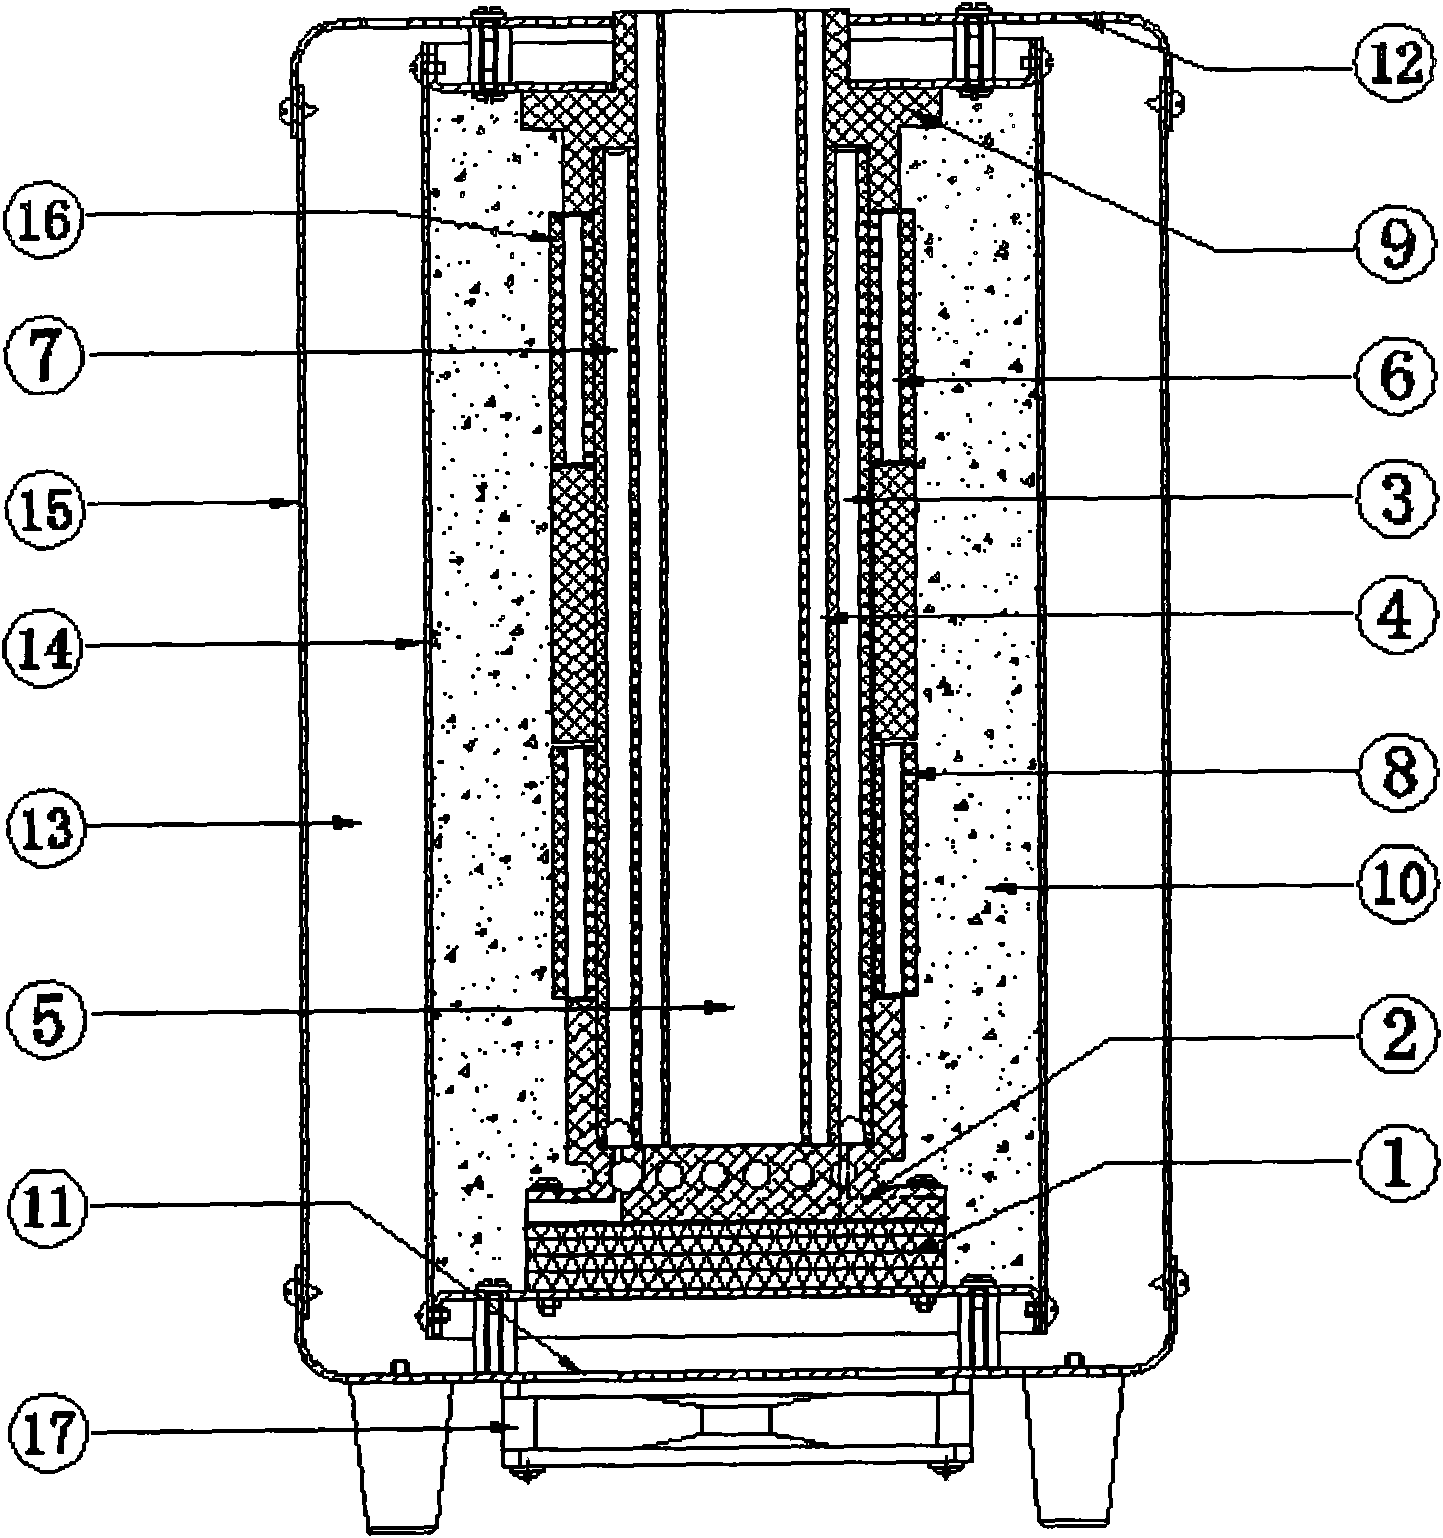 Novel vertical type thermocouple detecting furnace